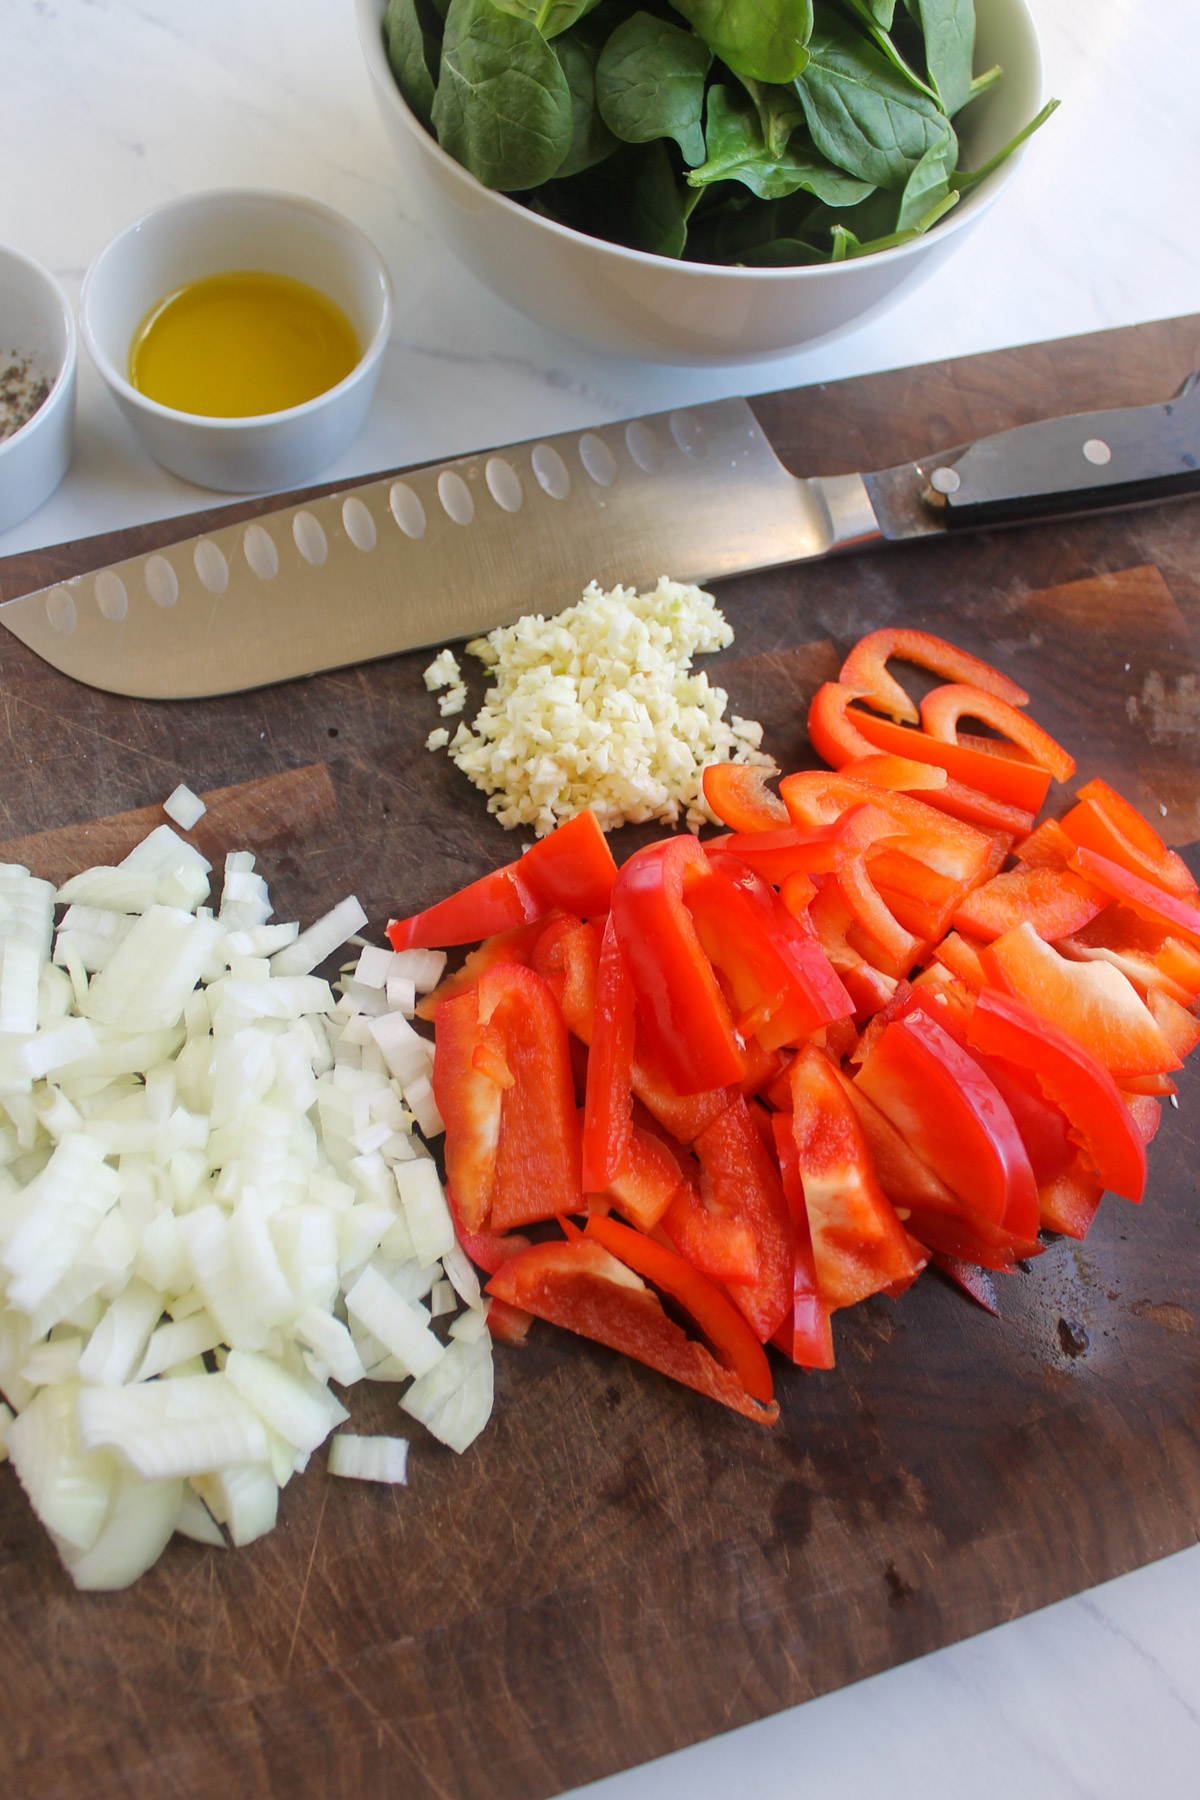 Prepared ingredients on a cutting board, chopped onions, red bell pepper, and minced garlic.